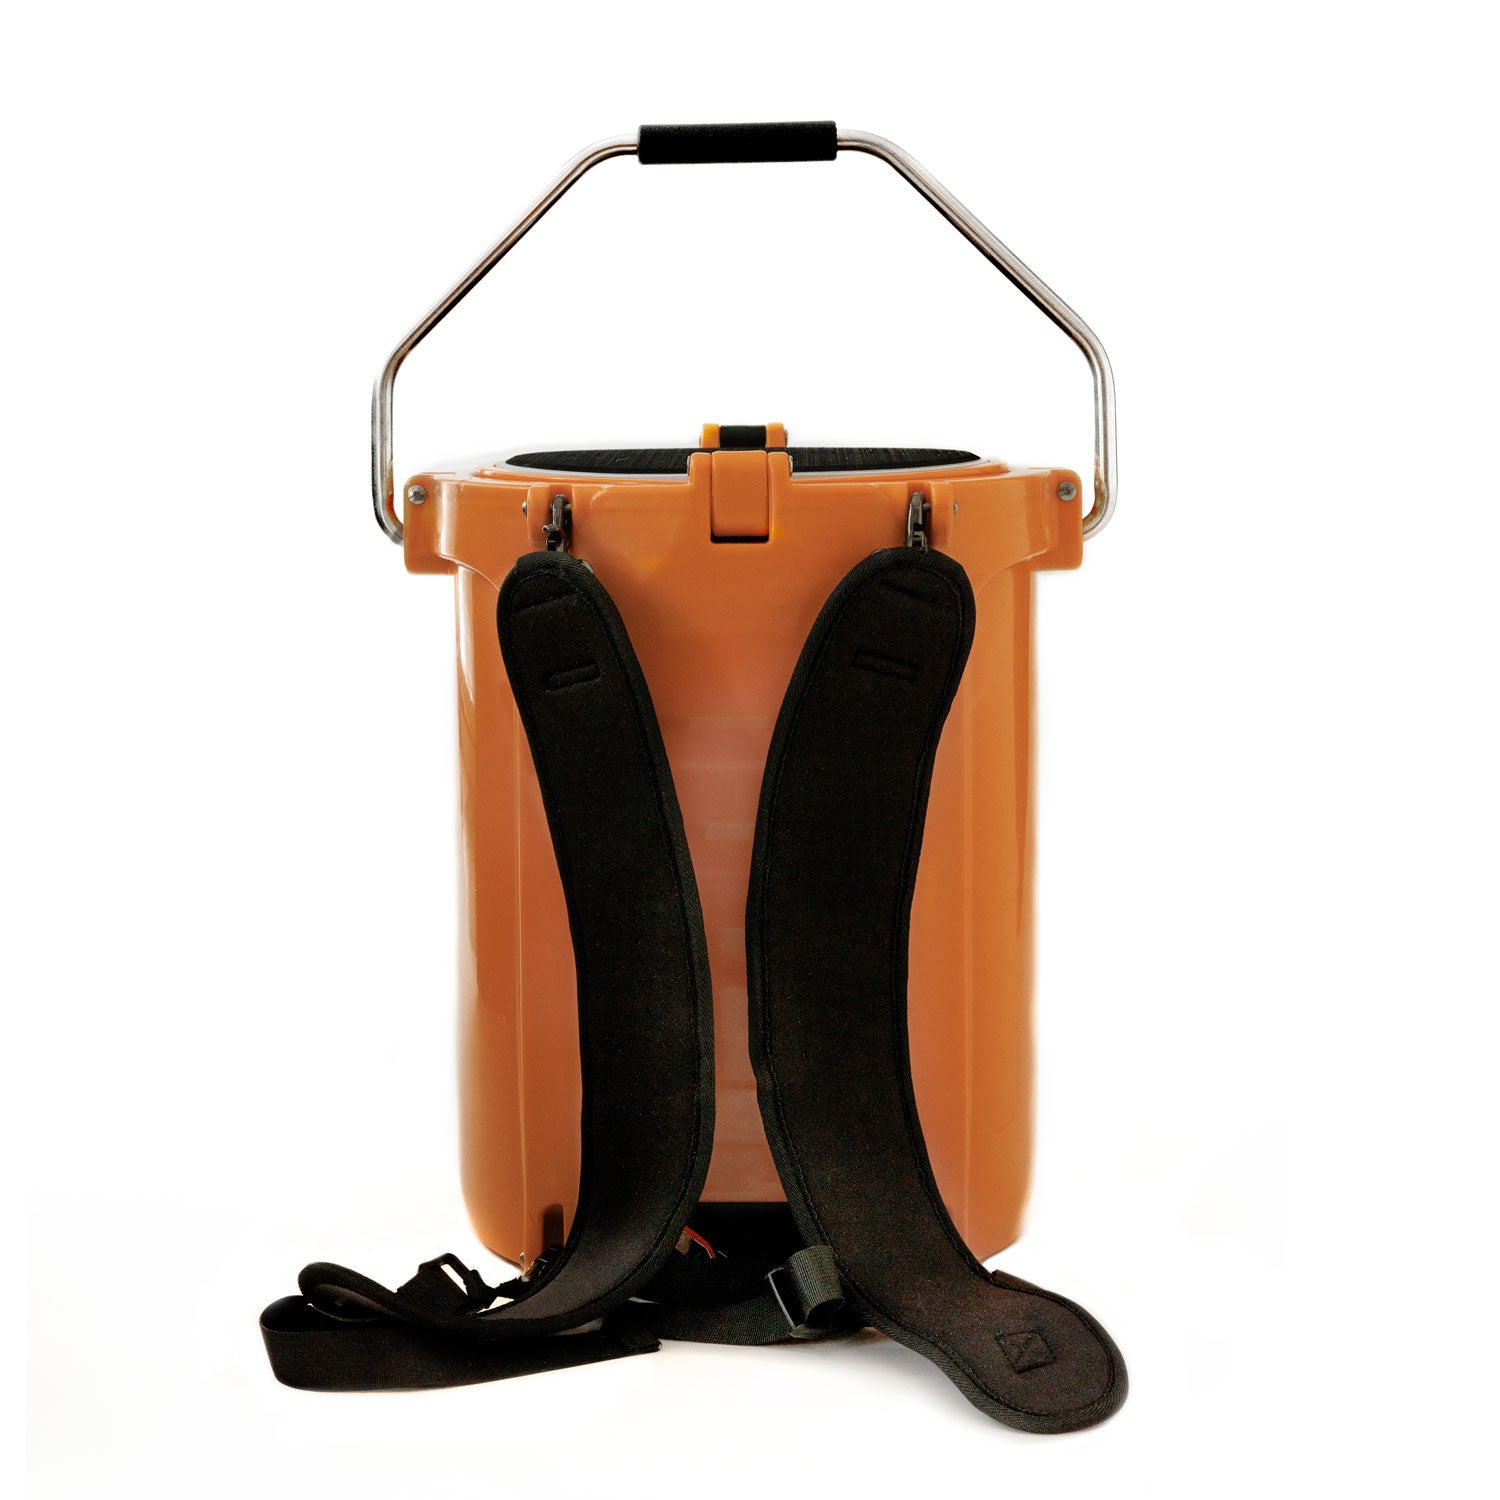 BruMate Backtap Puts A Cooler Jug On Backpack Straps, So You Can Walk  Around As A Human Drink Dispenser